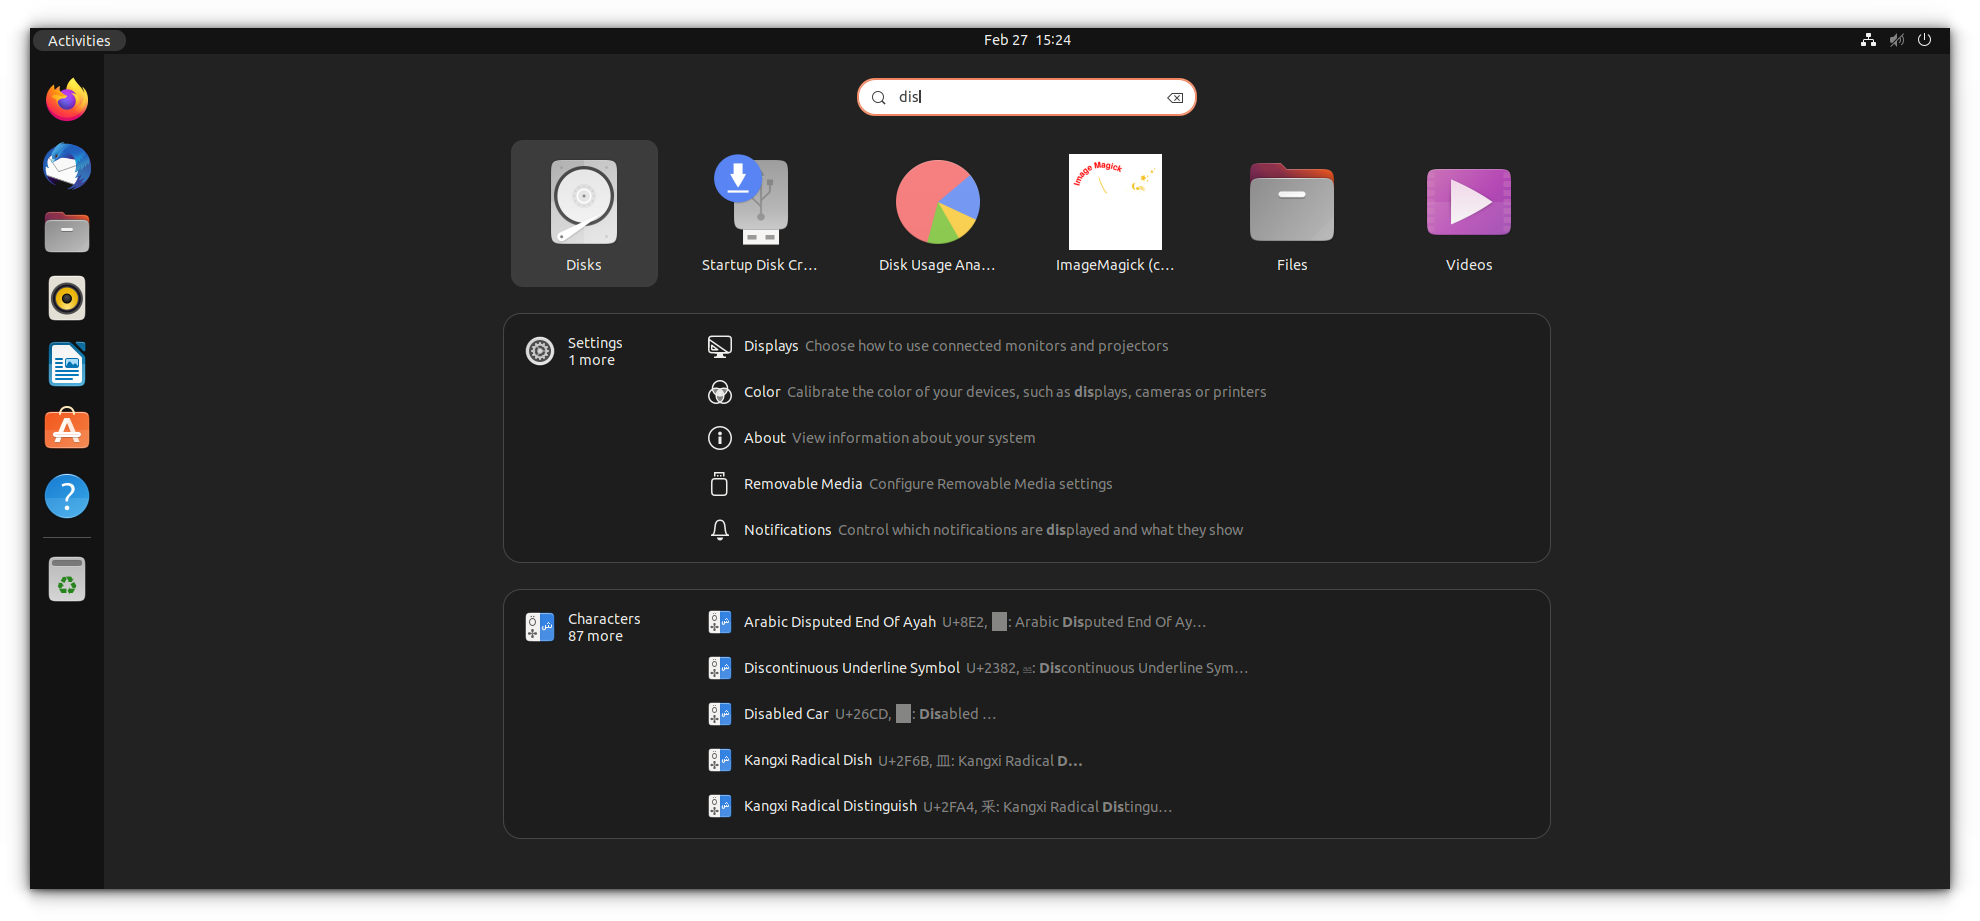 Search for Applications or Files in Ubuntu Activities Overview